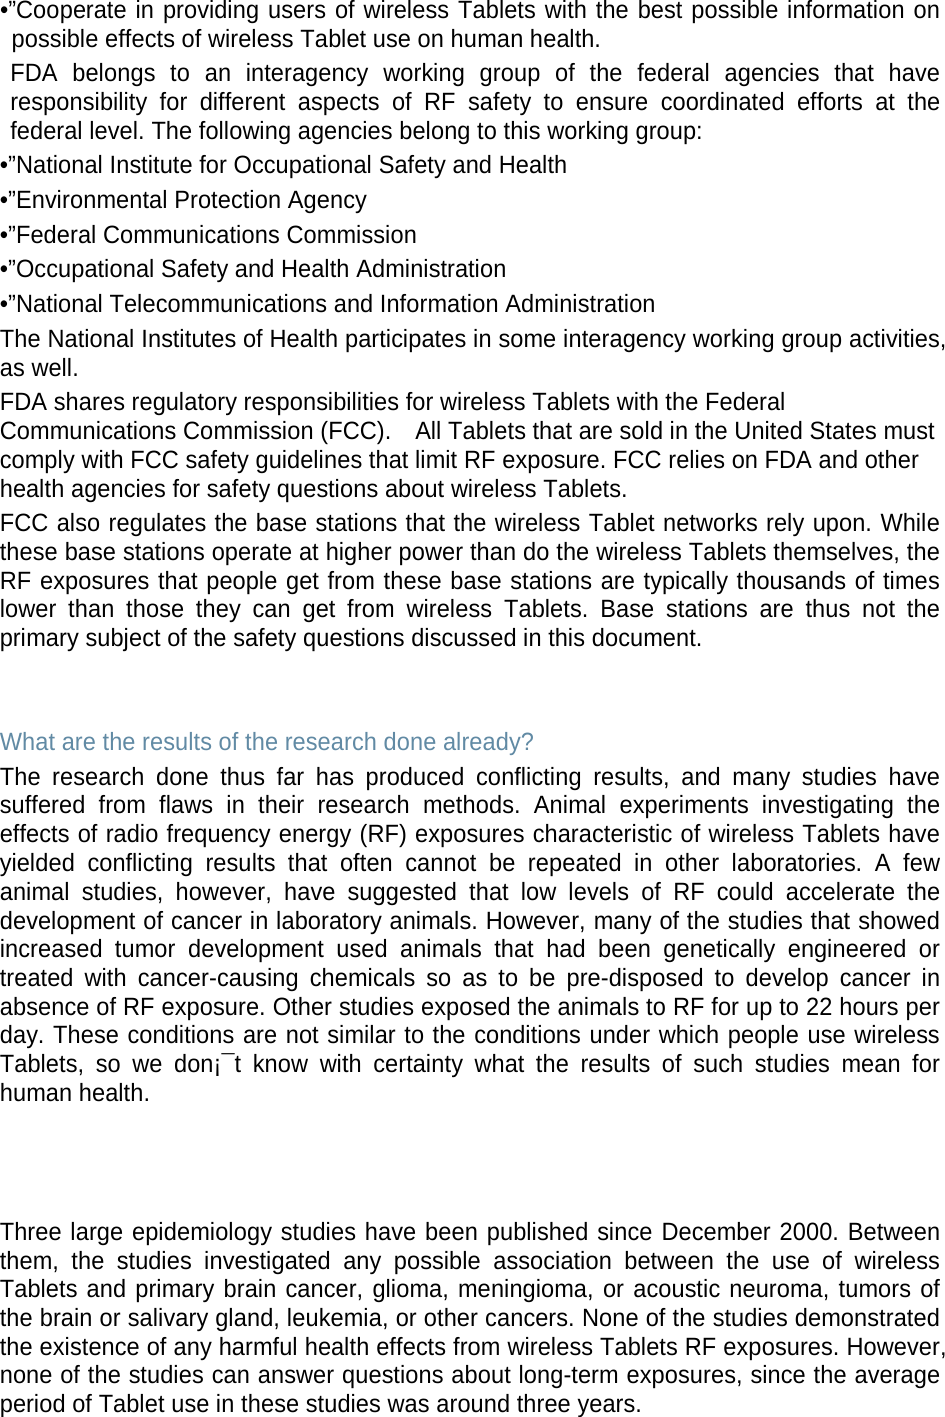 •”Cooperate in providing users of wireless Tablets with the best possible information on possible effects of wireless Tablet use on human health. FDA belongs to an interagency working group of the federal agencies that have responsibility for different aspects of RF safety to ensure coordinated efforts at the federal level. The following agencies belong to this working group: •”National Institute for Occupational Safety and Health •”Environmental Protection Agency •”Federal Communications Commission •”Occupational Safety and Health Administration •”National Telecommunications and Information Administration The National Institutes of Health participates in some interagency working group activities, as well. FDA shares regulatory responsibilities for wireless Tablets with the Federal Communications Commission (FCC).    All Tablets that are sold in the United States must comply with FCC safety guidelines that limit RF exposure. FCC relies on FDA and other health agencies for safety questions about wireless Tablets. FCC also regulates the base stations that the wireless Tablet networks rely upon. While these base stations operate at higher power than do the wireless Tablets themselves, the RF exposures that people get from these base stations are typically thousands of times lower than those they can get from wireless Tablets. Base stations are thus not the primary subject of the safety questions discussed in this document.   What are the results of the research done already? The research done thus far has produced conflicting results, and many studies have suffered from flaws in their research methods. Animal experiments investigating the effects of radio frequency energy (RF) exposures characteristic of wireless Tablets have yielded conflicting results that often cannot be repeated in other laboratories. A few animal studies, however, have suggested that low levels of RF could accelerate the development of cancer in laboratory animals. However, many of the studies that showed increased tumor development used animals that had been genetically engineered or treated with cancer-causing chemicals so as to be pre-disposed to develop cancer in absence of RF exposure. Other studies exposed the animals to RF for up to 22 hours per day. These conditions are not similar to the conditions under which people use wireless Tablets, so we don¡¯t know with certainty what the results of such studies mean for human health.    Three large epidemiology studies have been published since December 2000. Between them, the studies investigated any possible association between the use of wireless Tablets and primary brain cancer, glioma, meningioma, or acoustic neuroma, tumors of the brain or salivary gland, leukemia, or other cancers. None of the studies demonstrated the existence of any harmful health effects from wireless Tablets RF exposures. However, none of the studies can answer questions about long-term exposures, since the average period of Tablet use in these studies was around three years. 